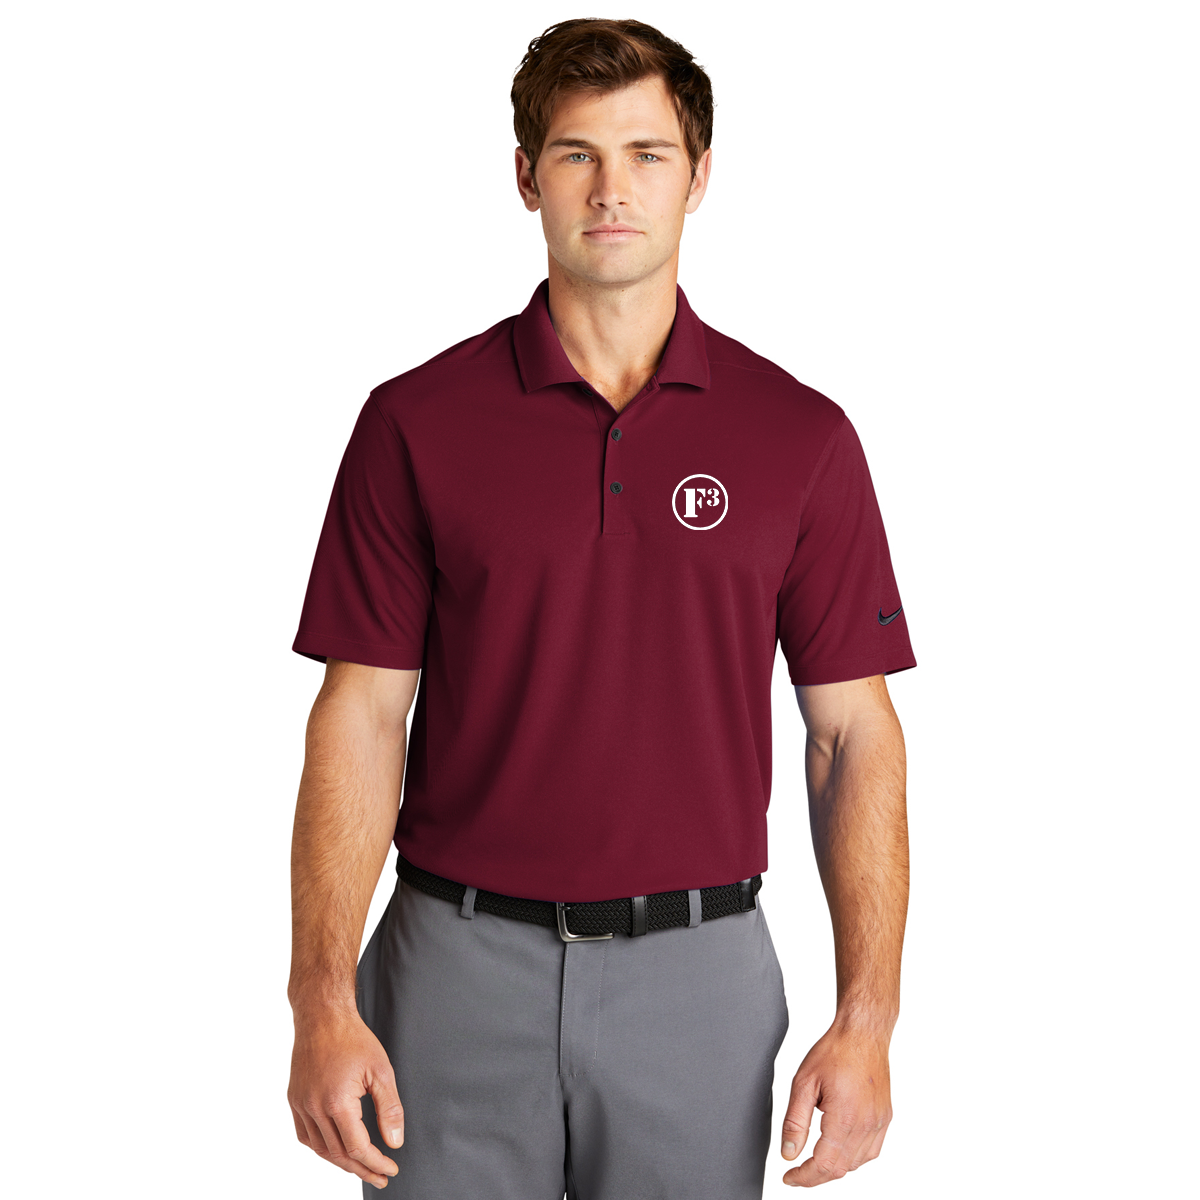 F3 Nike Dri-FIT Micro Pique 2.0 Polo - Made to Order